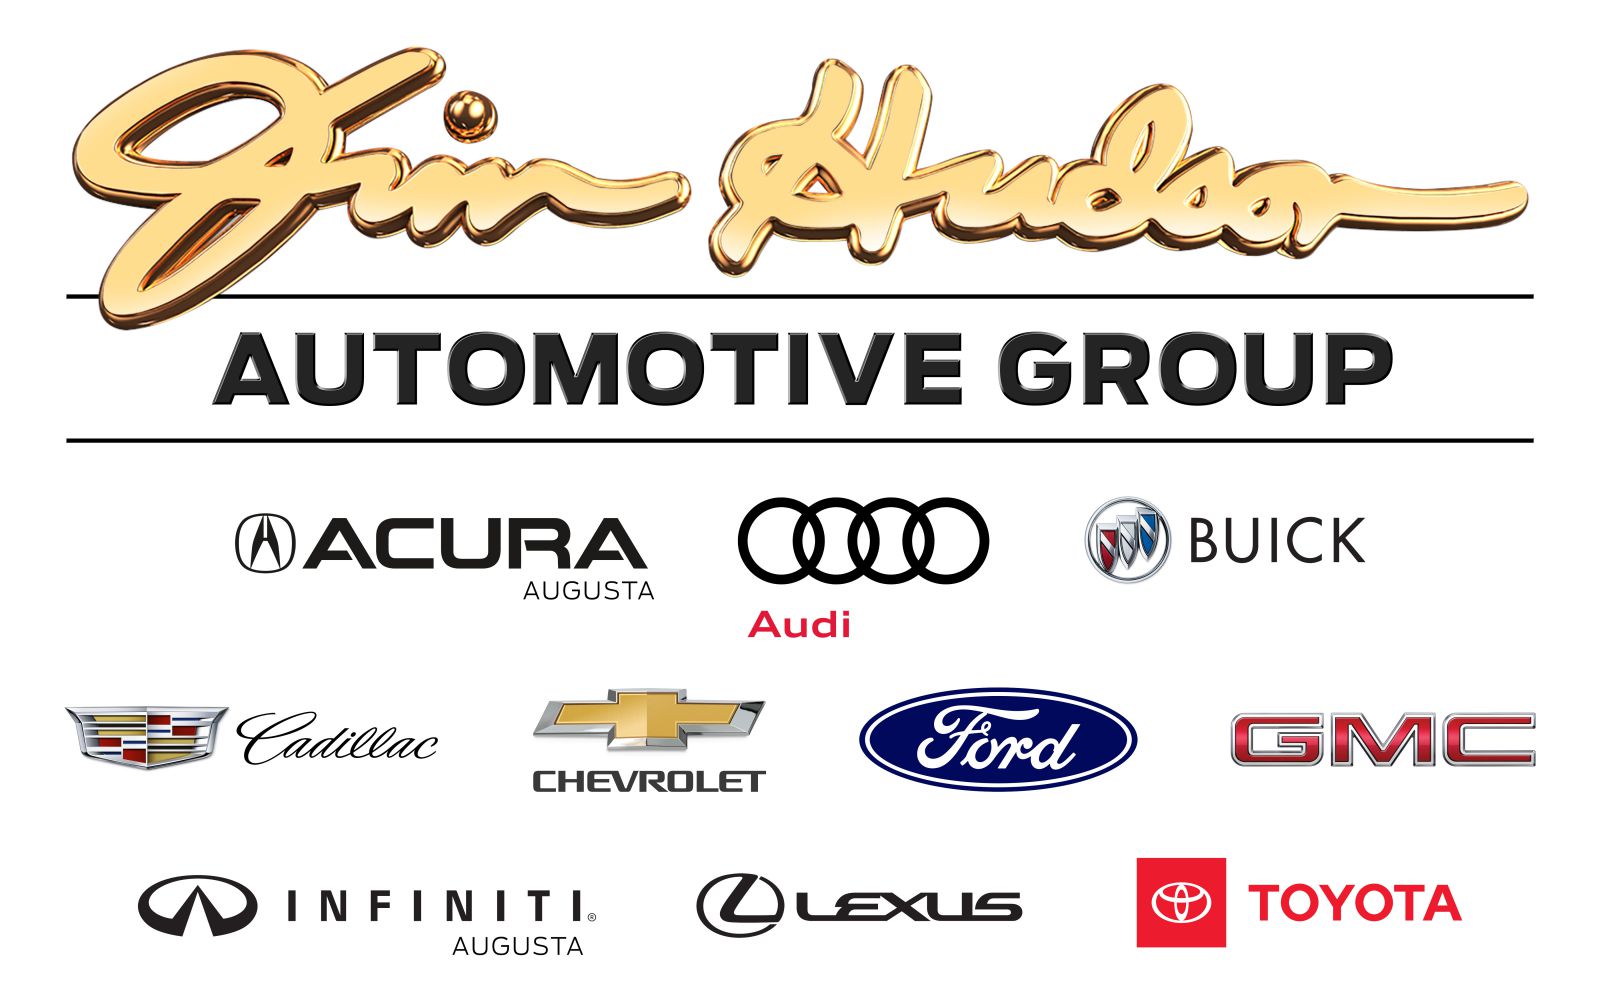 The Jim Hudson Automotive Group logo composed of Jim Hudson's signature in gold cursive font with black shadows. Two black horizontal lines surround the words Automotive Group in black capitalized font just below the signature. Affiliated automotive logos are below the second horizontal line in three horizontal rows. The first row includes the Acura logo (a circled, capitalized A before the word Acura in bold, black font), the Audi logo (four black overlapping circular outlines with the word Audi in small red font below the first two rings), and the Buick logo (a red, white, and blue shield outline in silver with a silver bar diagonally from the upper left corner to bottom right side arranged in a diagonal line with the lower end on the left contained in a silver circle with the word Buick in black font to the right). The second row includes the Cadillac logo (red and gold wings with the word Cadillac in black cursive font to the right), the Chevrolet logo (a gold symmetric cross with a silver border and the word Chevrolet in bold black font centered below it), the Ford logo (a blue oval with a white oval outline edging the inside and the word Ford in white stylized cursive font), and the GMC logo (the letters GMC in red bold font). The third row includes the Infiniti of Augusta logo (a capitalized B with a rounded stem and a v shape separating the loops rotated 90 degrees to the right to form a stylized infiniti symbol. The word Infiniti is in black bold font with the word Augusta in smaller black font right marginated below it), the Lexus logo (a circle with a black bold L forming a 45 degree angle inside it without touching the left side, followed by the word Lexus in black bold font to the right), and the Toyota logo (a red square with a white circular outline centered inside it. The circle has a white convex line at the top quarter of the circle and a white narrow vertical oval outline in its center. The word Toyota is in red bold font to the right of the square).